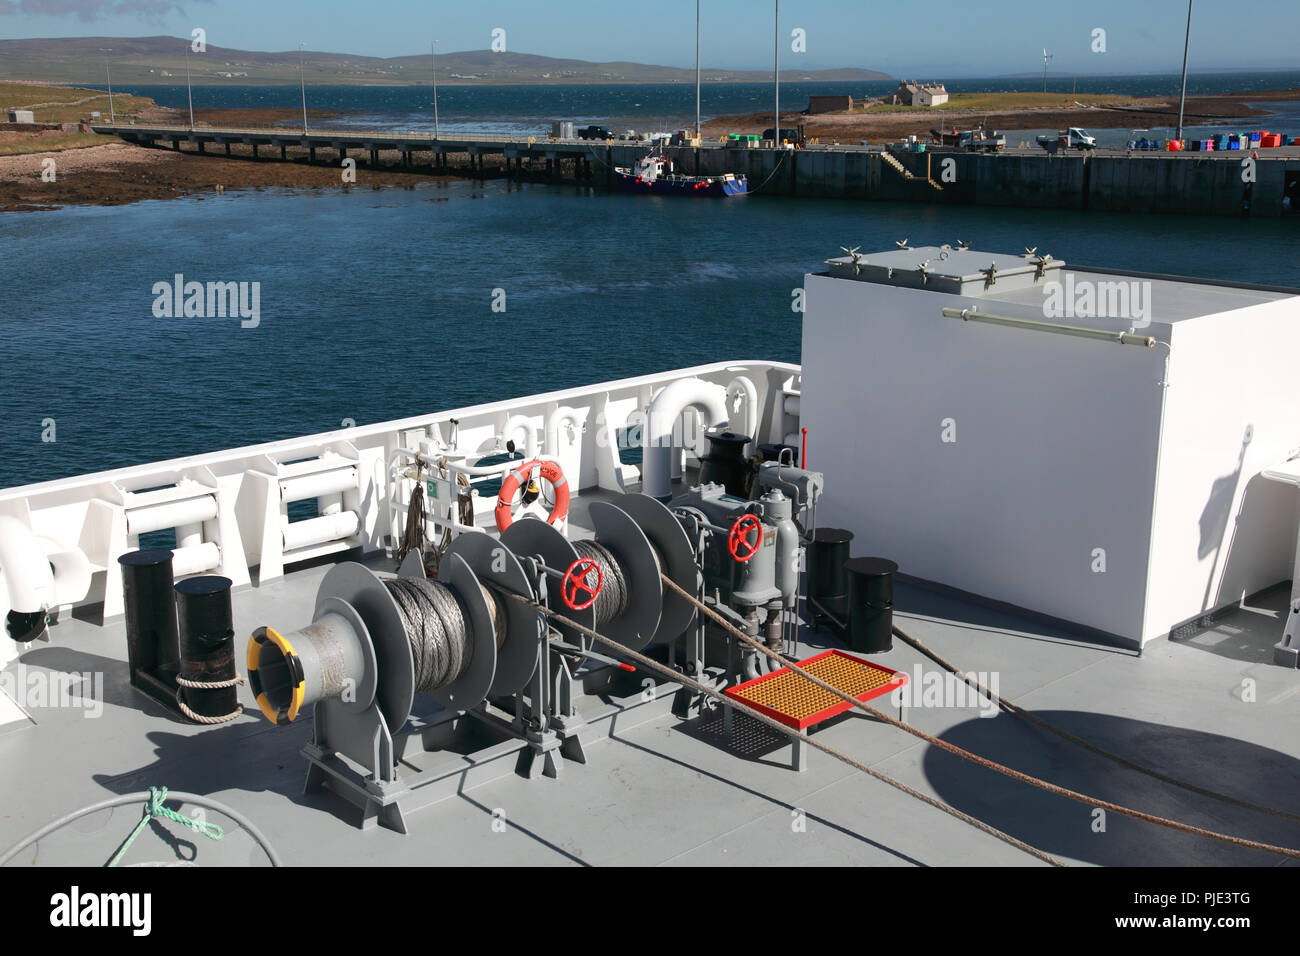 Windlasses and capstans on the rear deck of the car ferry Hamnavoe, Stromness, Orkney Islands, Scotland. Stock Photo